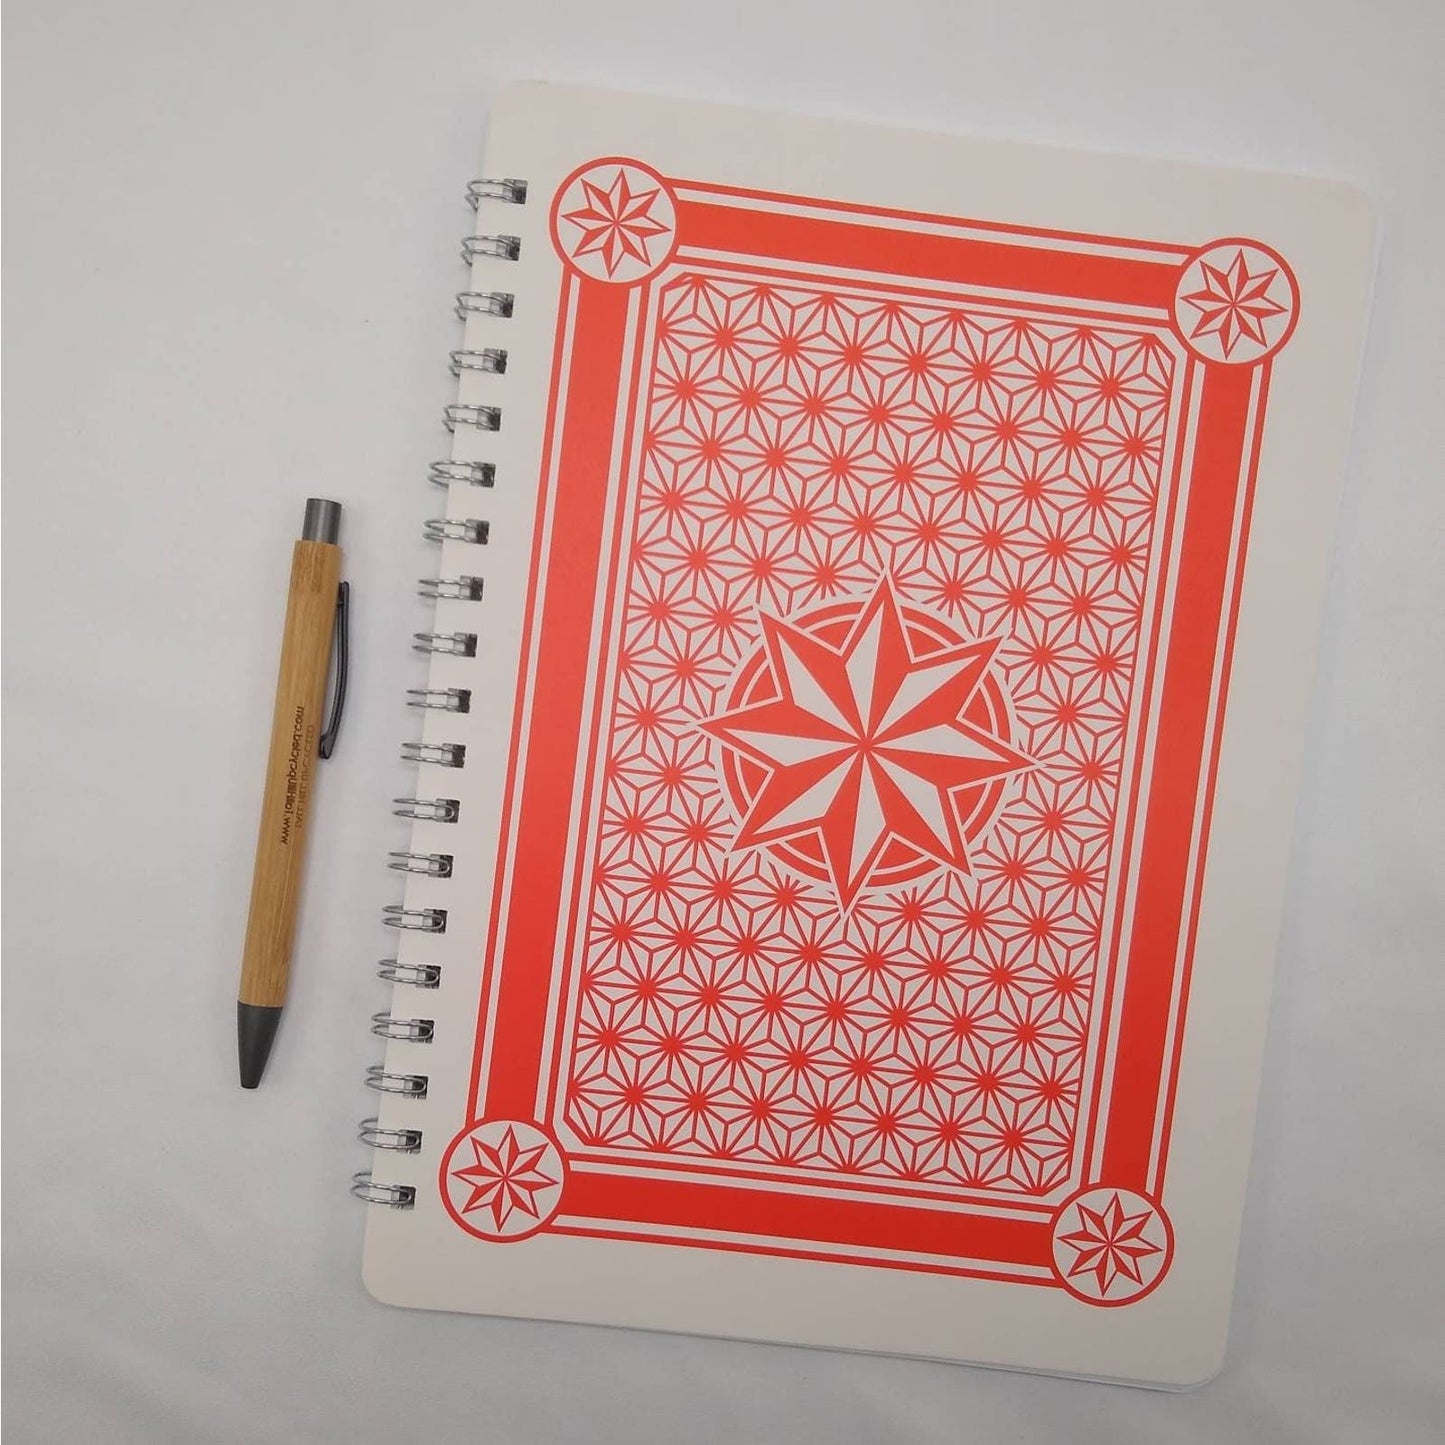 Giant Playing Card Spiral Bound Journal, Altered Book, Junk Journal, Blank Book Journal,